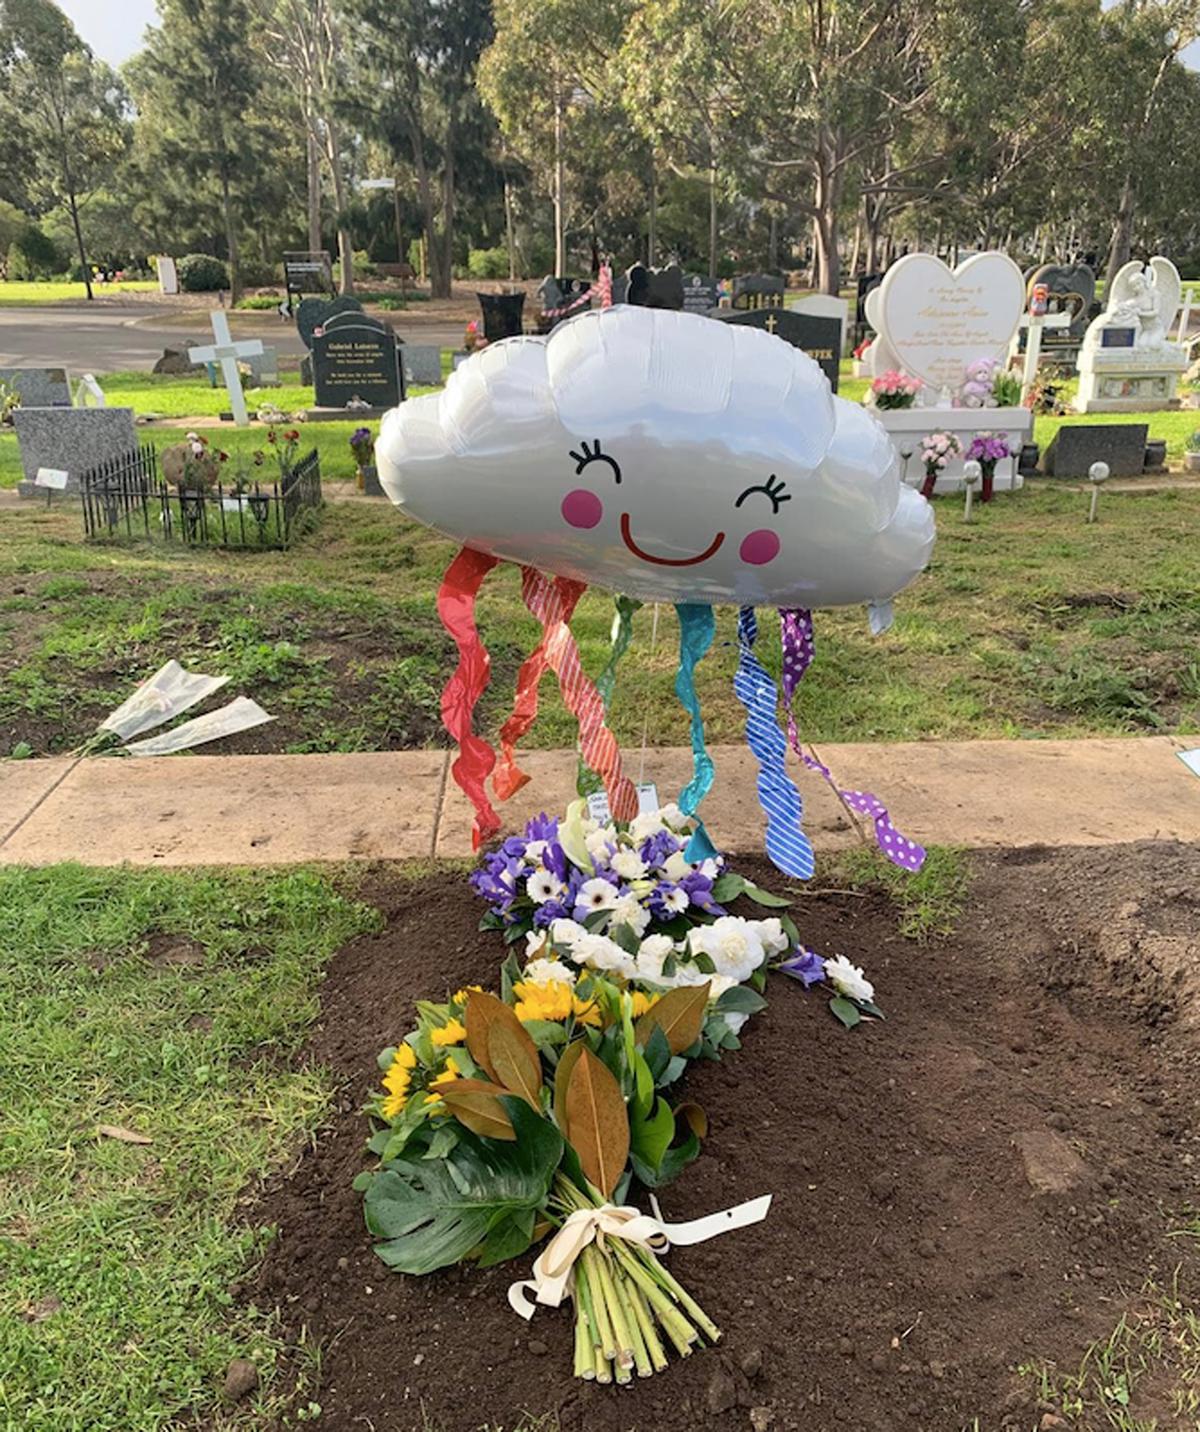 Four-year-old Jahleel's grave site. (Caters News)